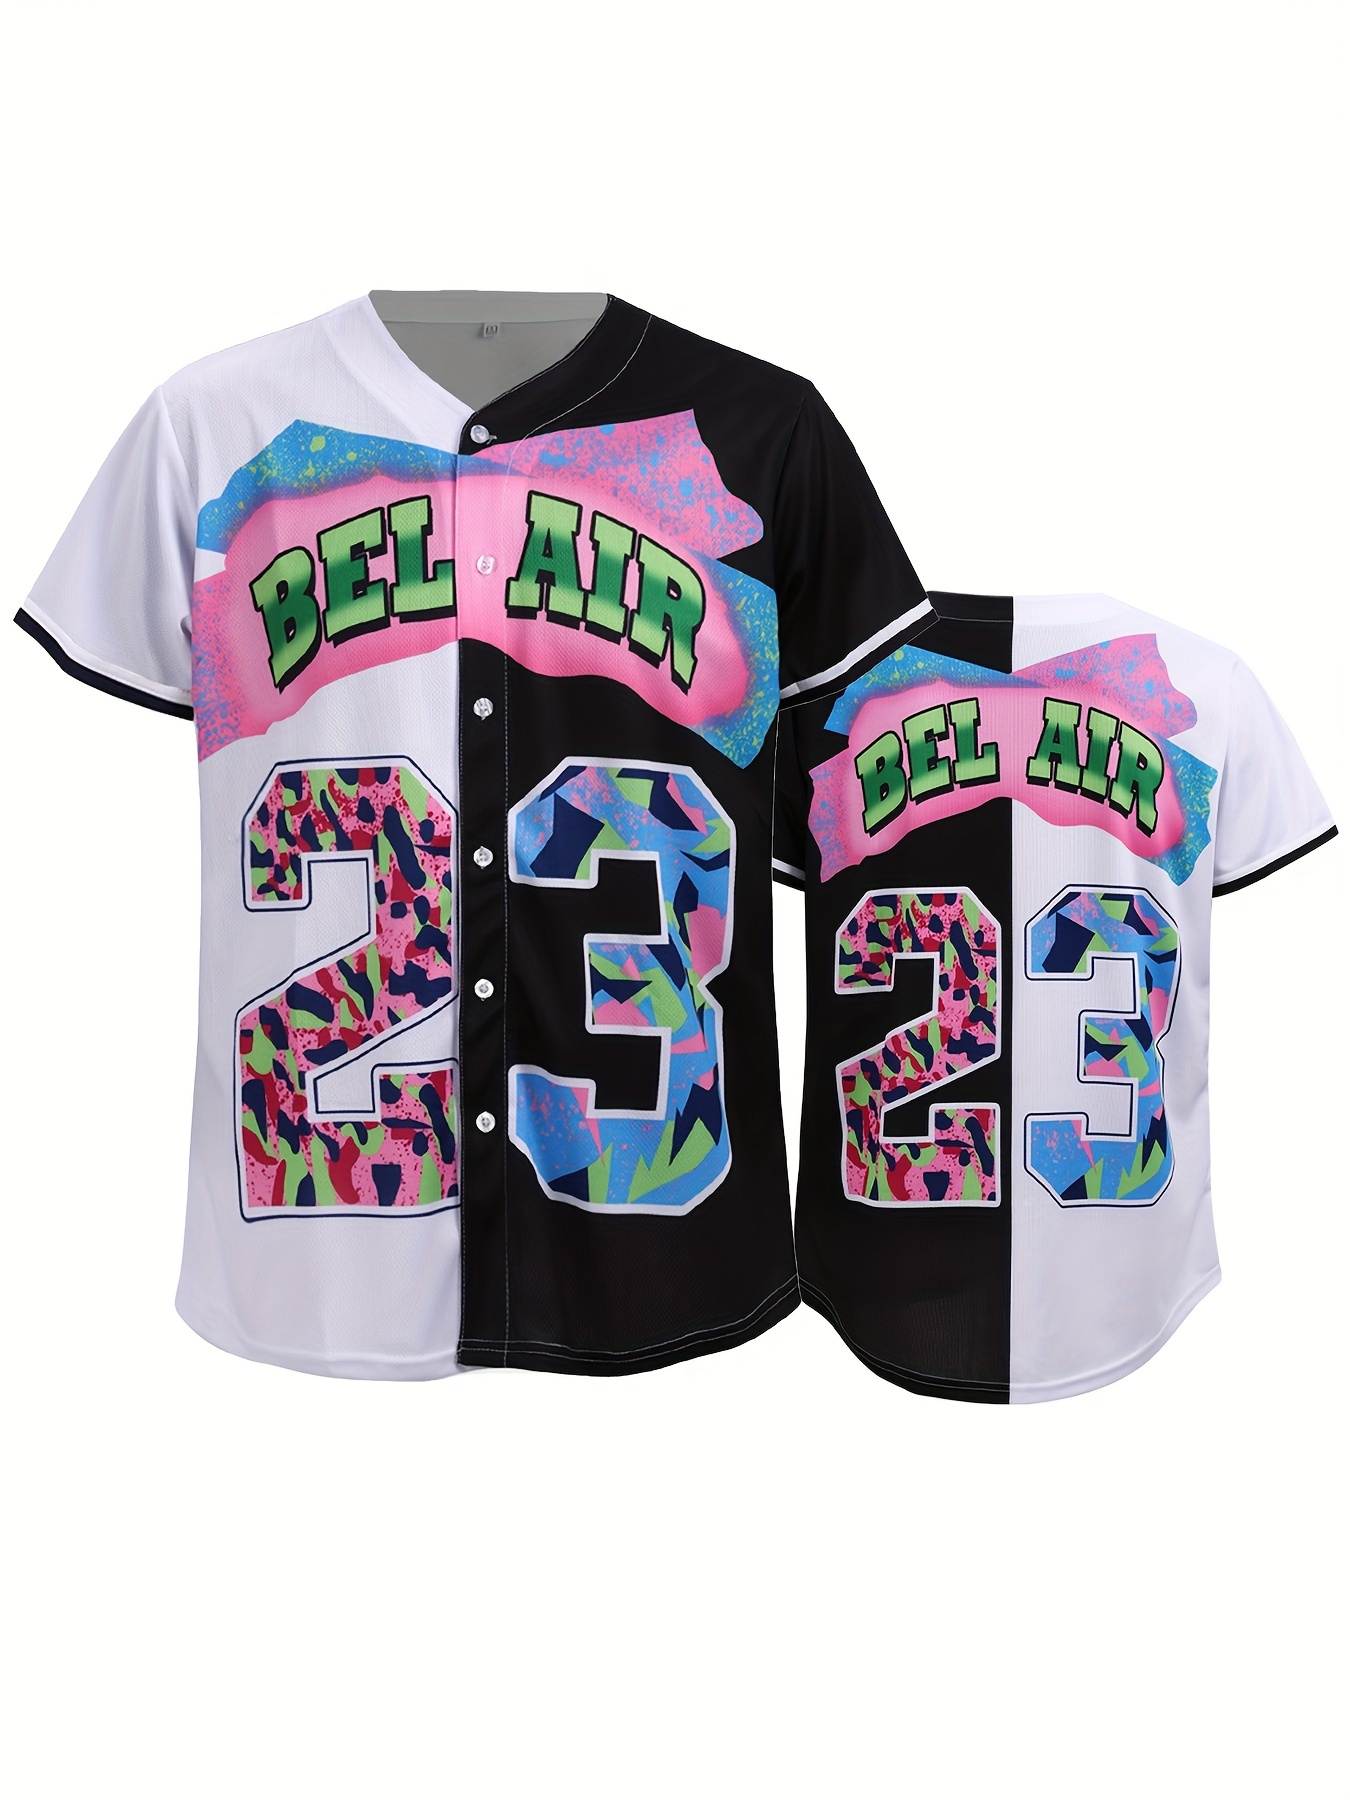 Men's Hip Hop Style Color Block #23 Baseball Jersey, Retro Baseball Shirt, Slightly Stretch Breathable Embroidery Button Up Sports Uniform for